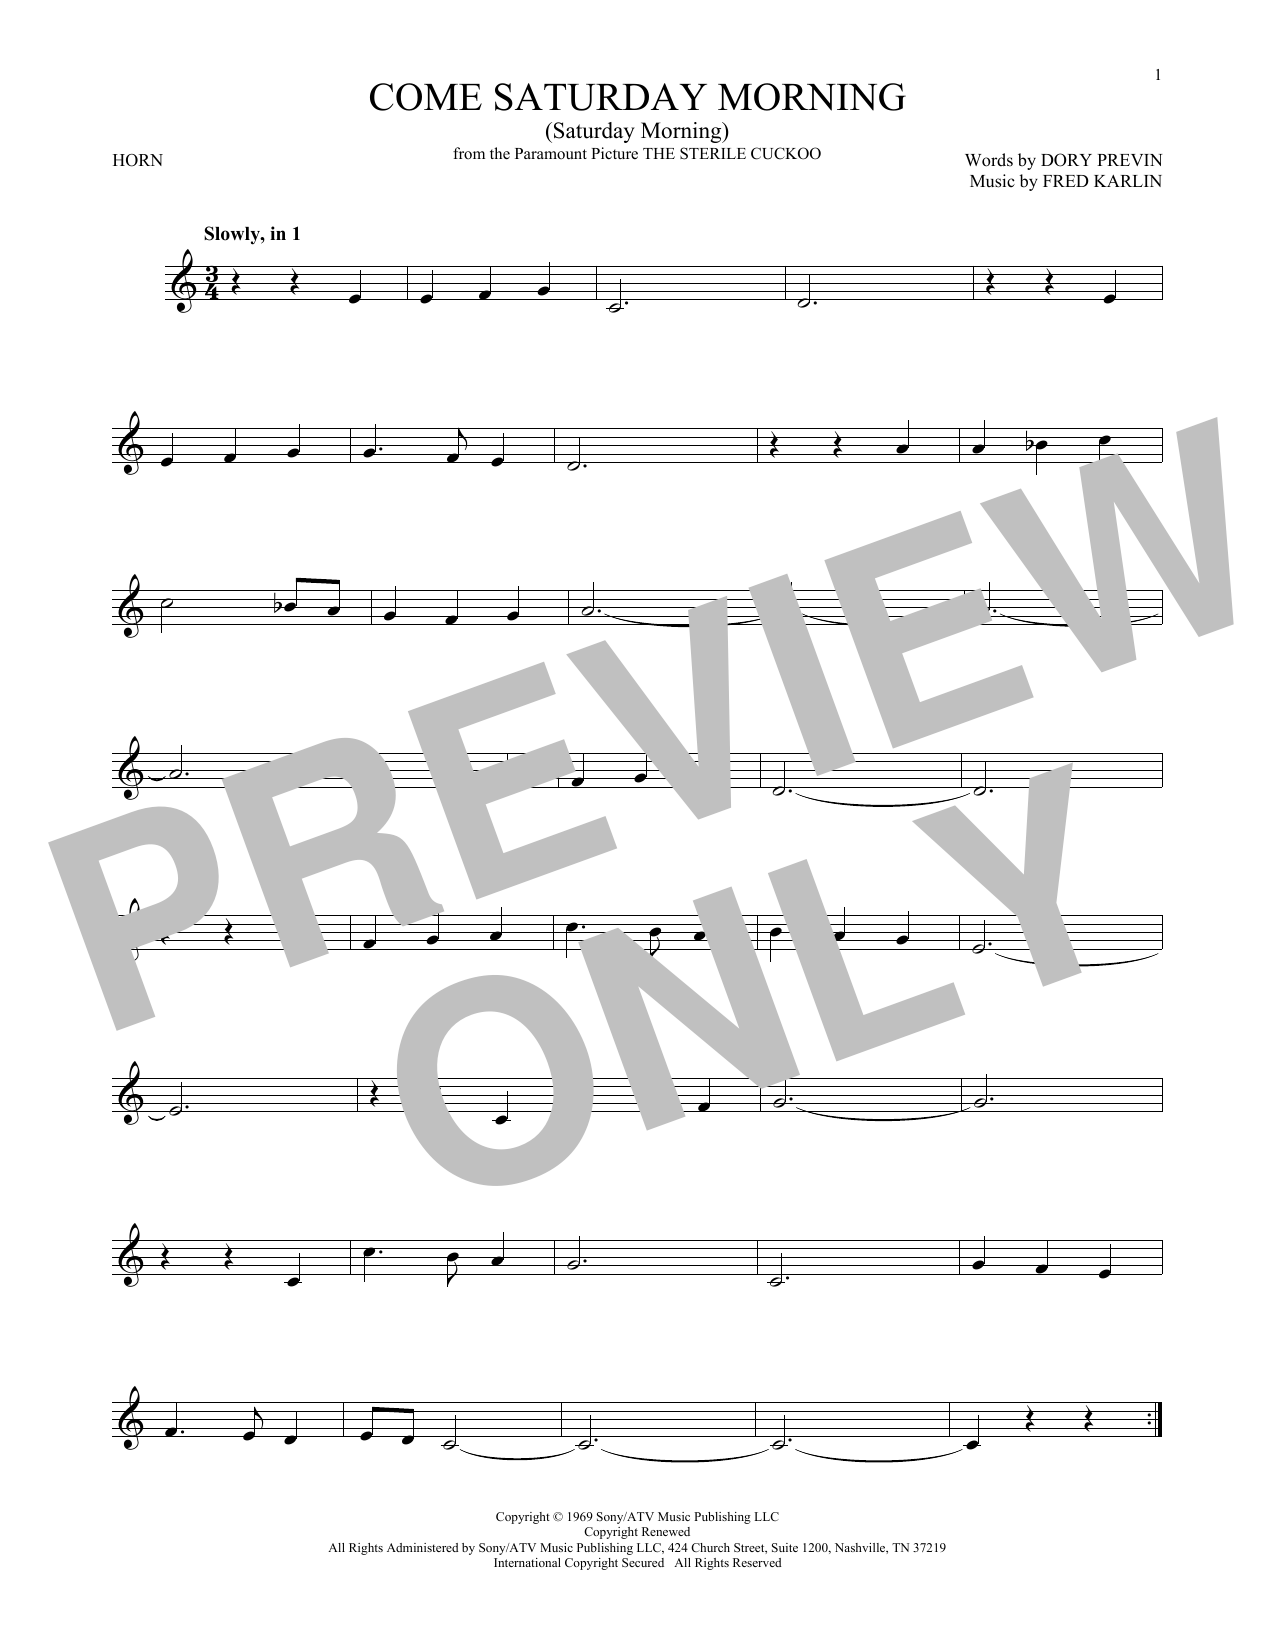 Download Dory Previn Come Saturday Morning (Saturday Morning Sheet Music